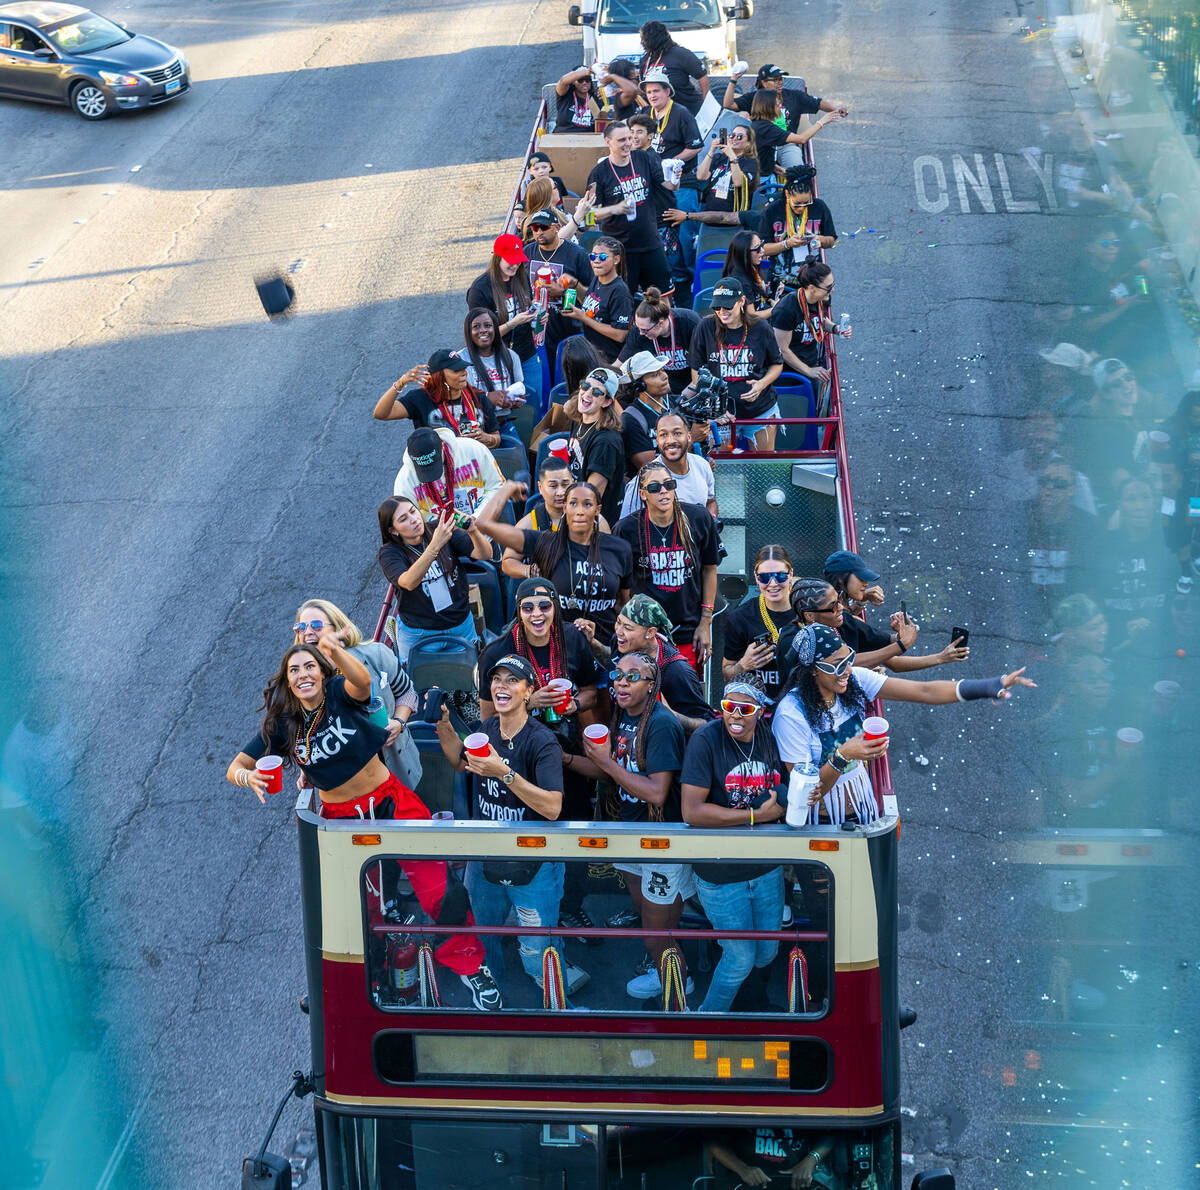 The Aces have fun with the fans during their championship parade along Las Vegas Boulevard to T ...